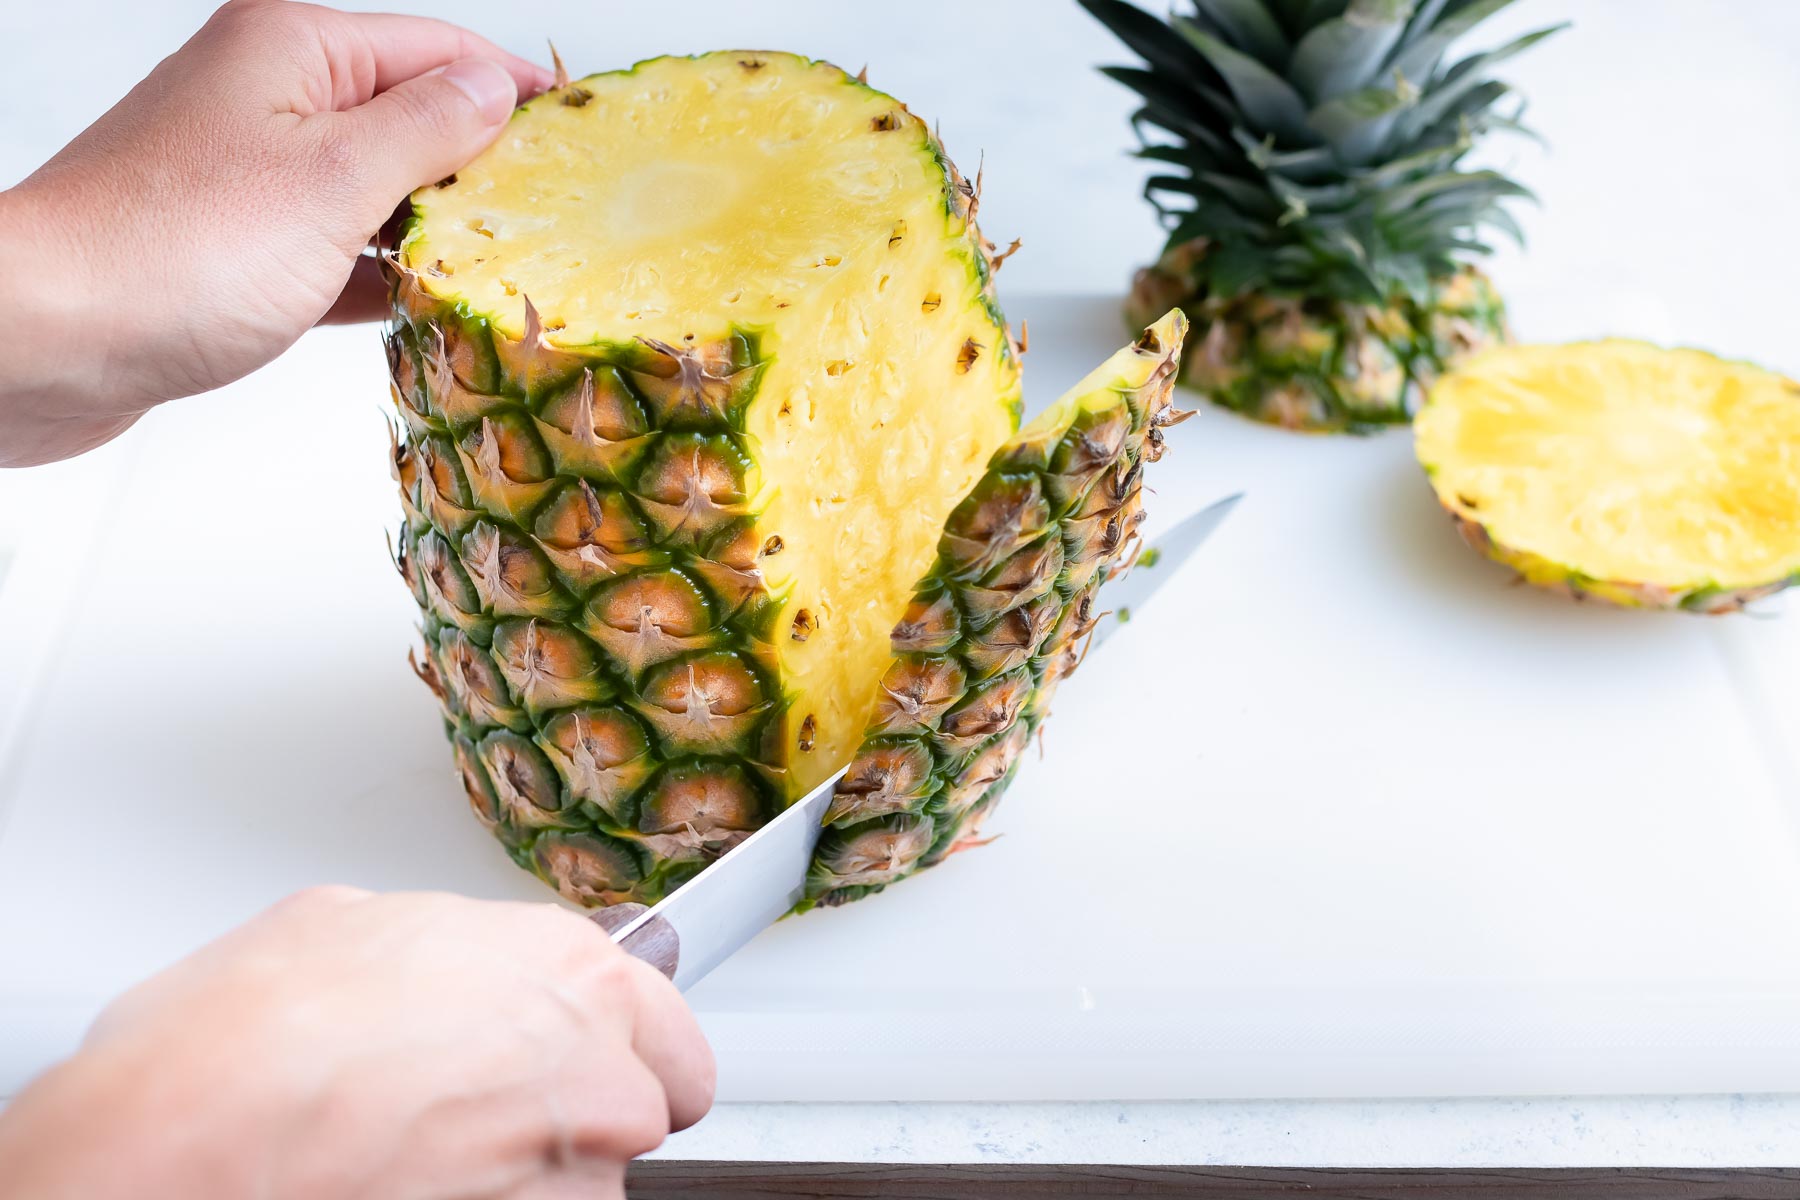 The side skin of the pineapple is cut off.